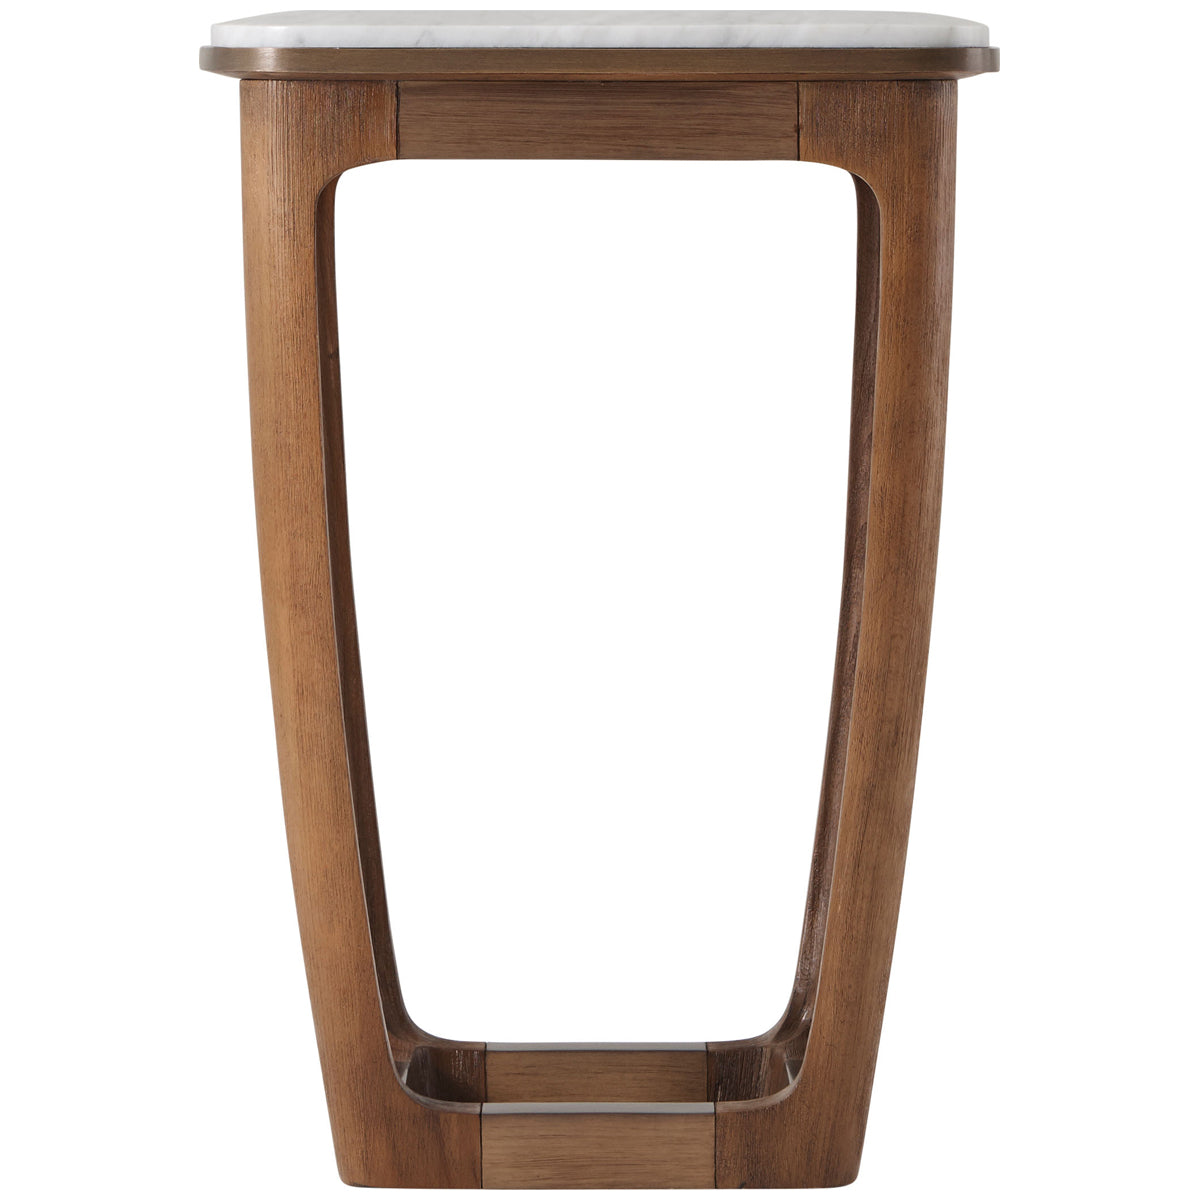 Theodore Alexander Converge Accent Table II